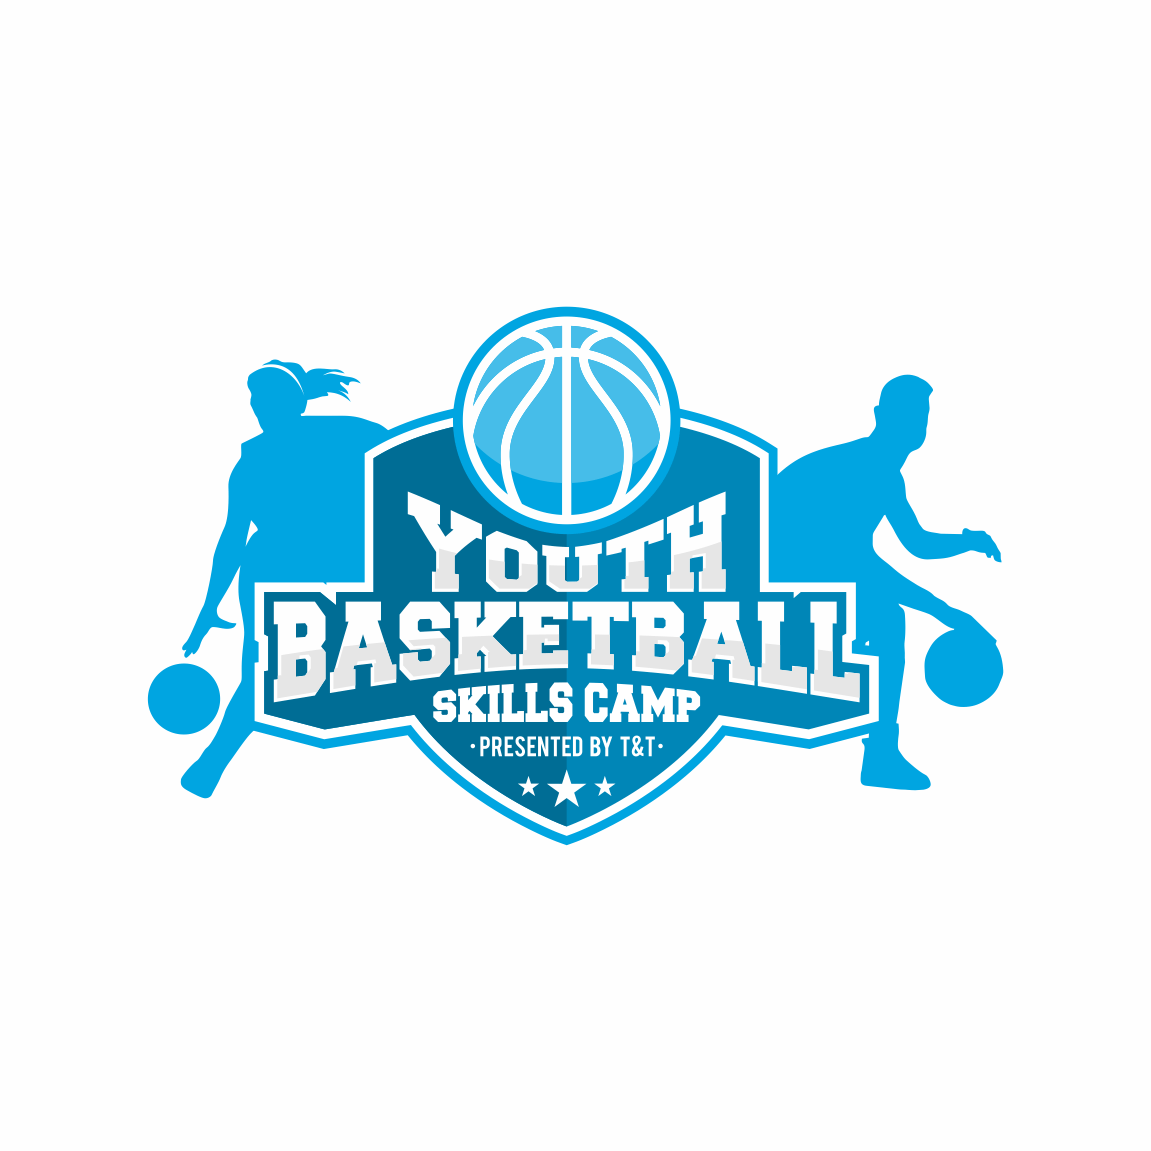 Basketball Camp Logo - T&T Youth Basketball Camp Logo. T&T Creative Group